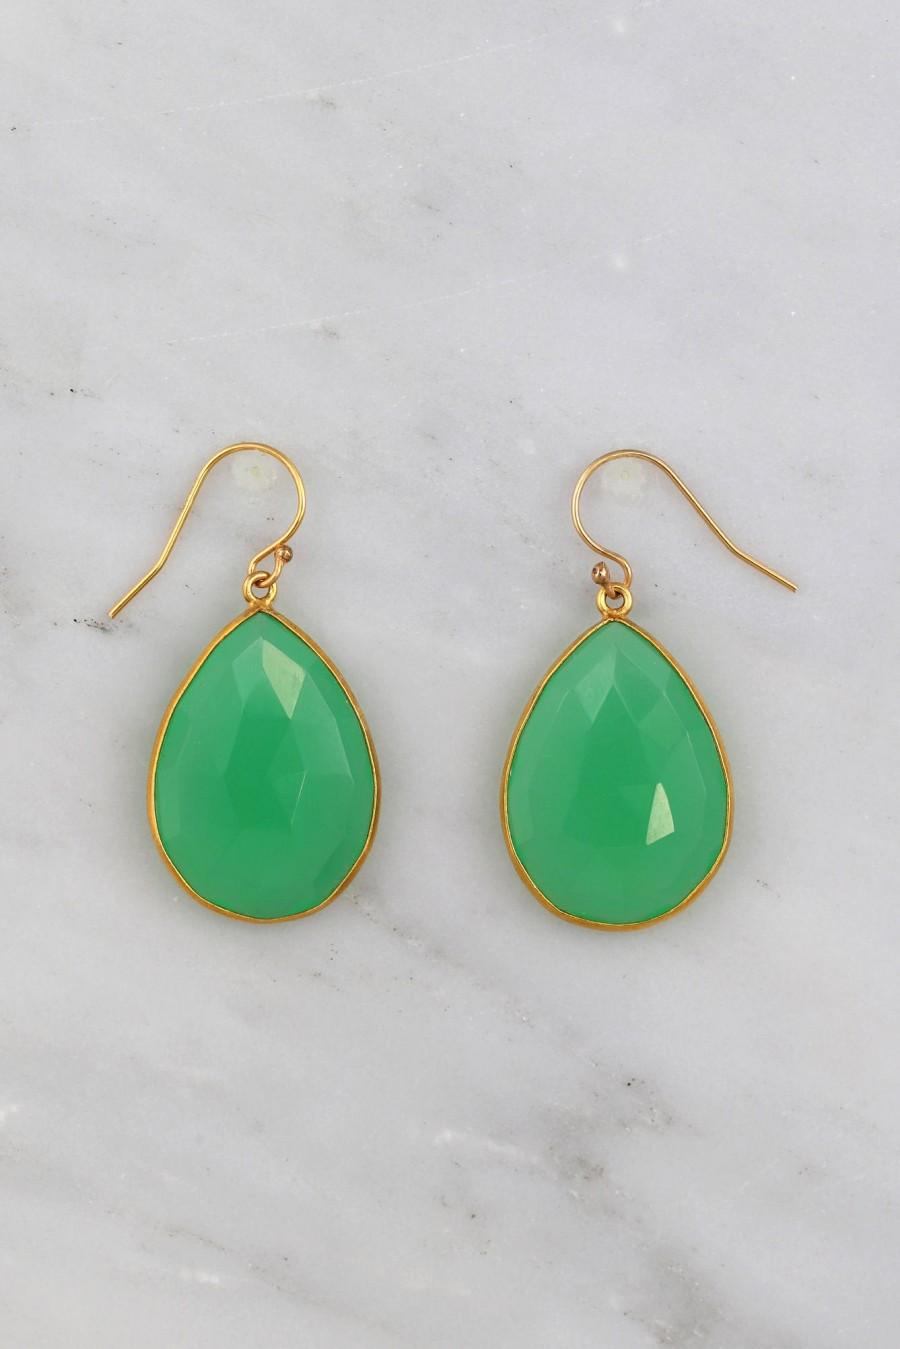 Mariage - Chrysoprase Earring, Drop and Dangle Earring, Green Gemstone Earring, Gold filled wires Earring, Large Gemstone Earring, Elegant Earring